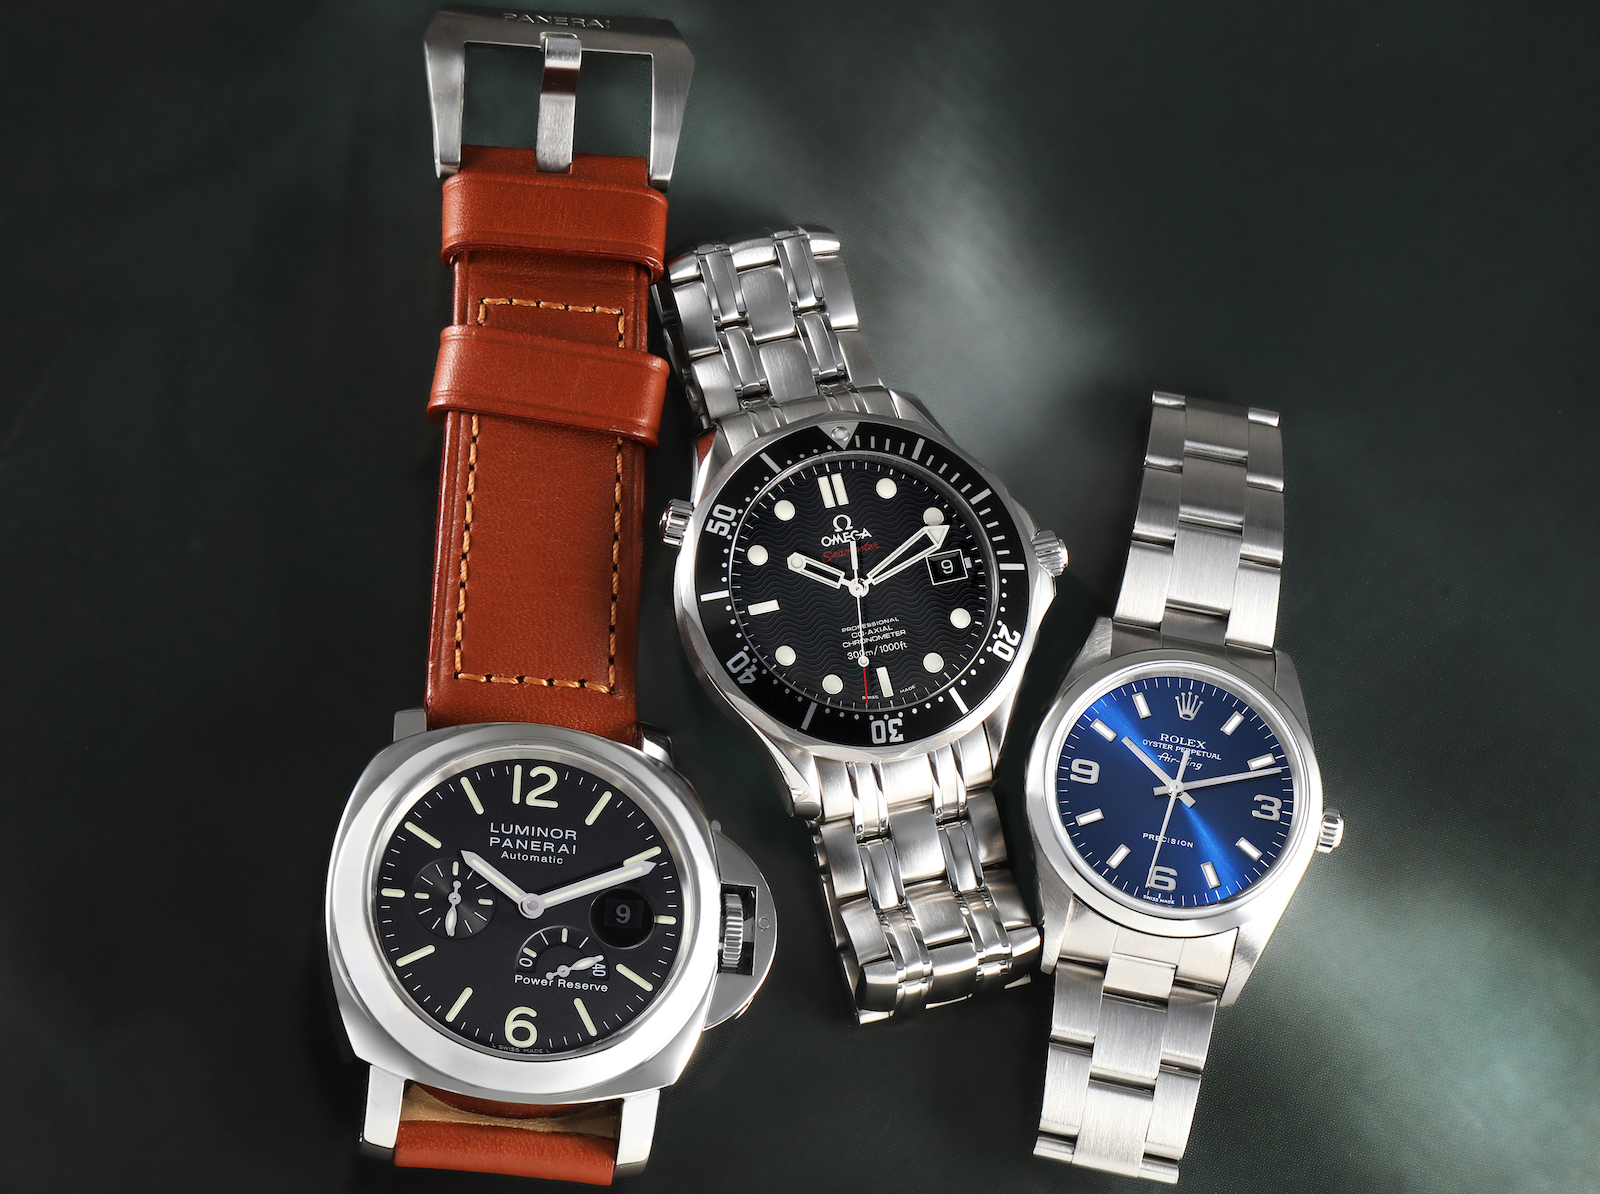 Best Entry Level Luxury Watches - Rolex, Omega and Panerai